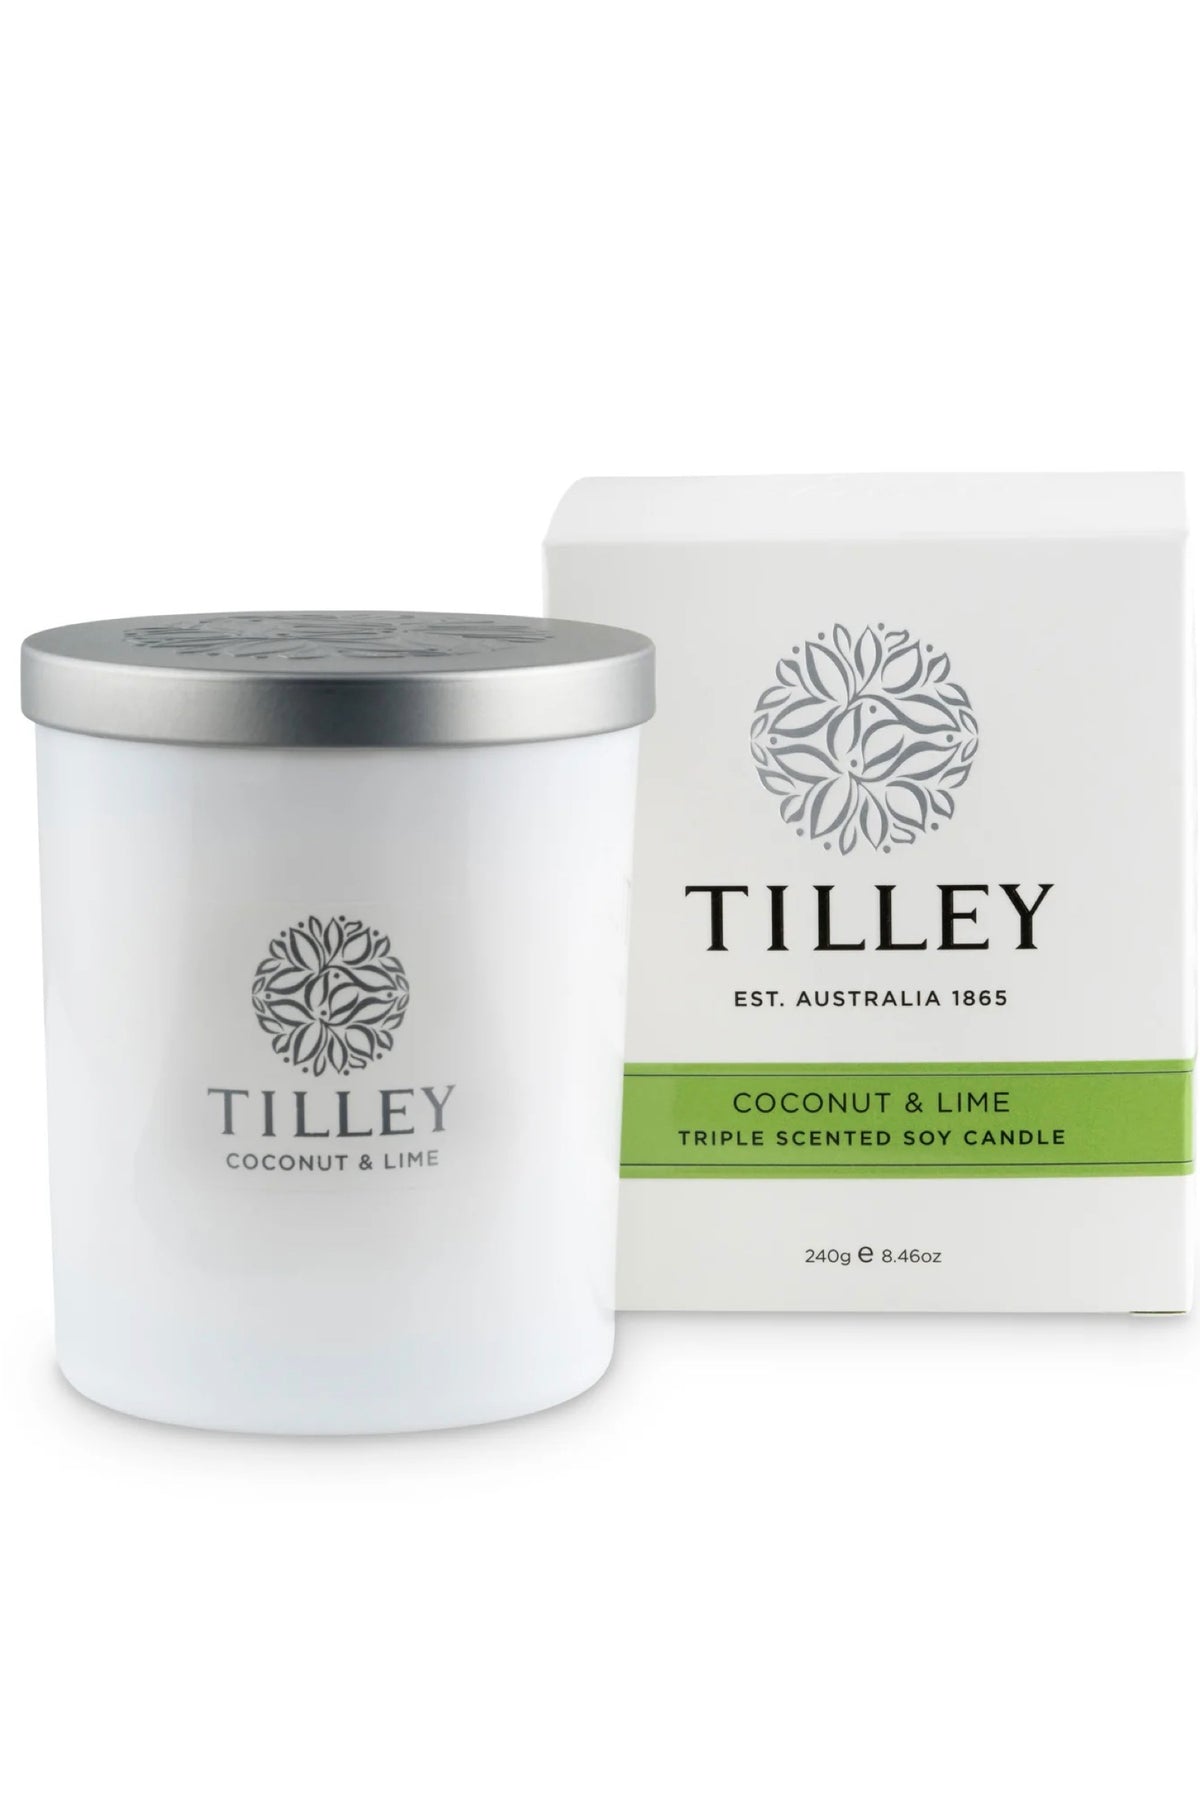 Tilley Soy Candle Coconut & Lime